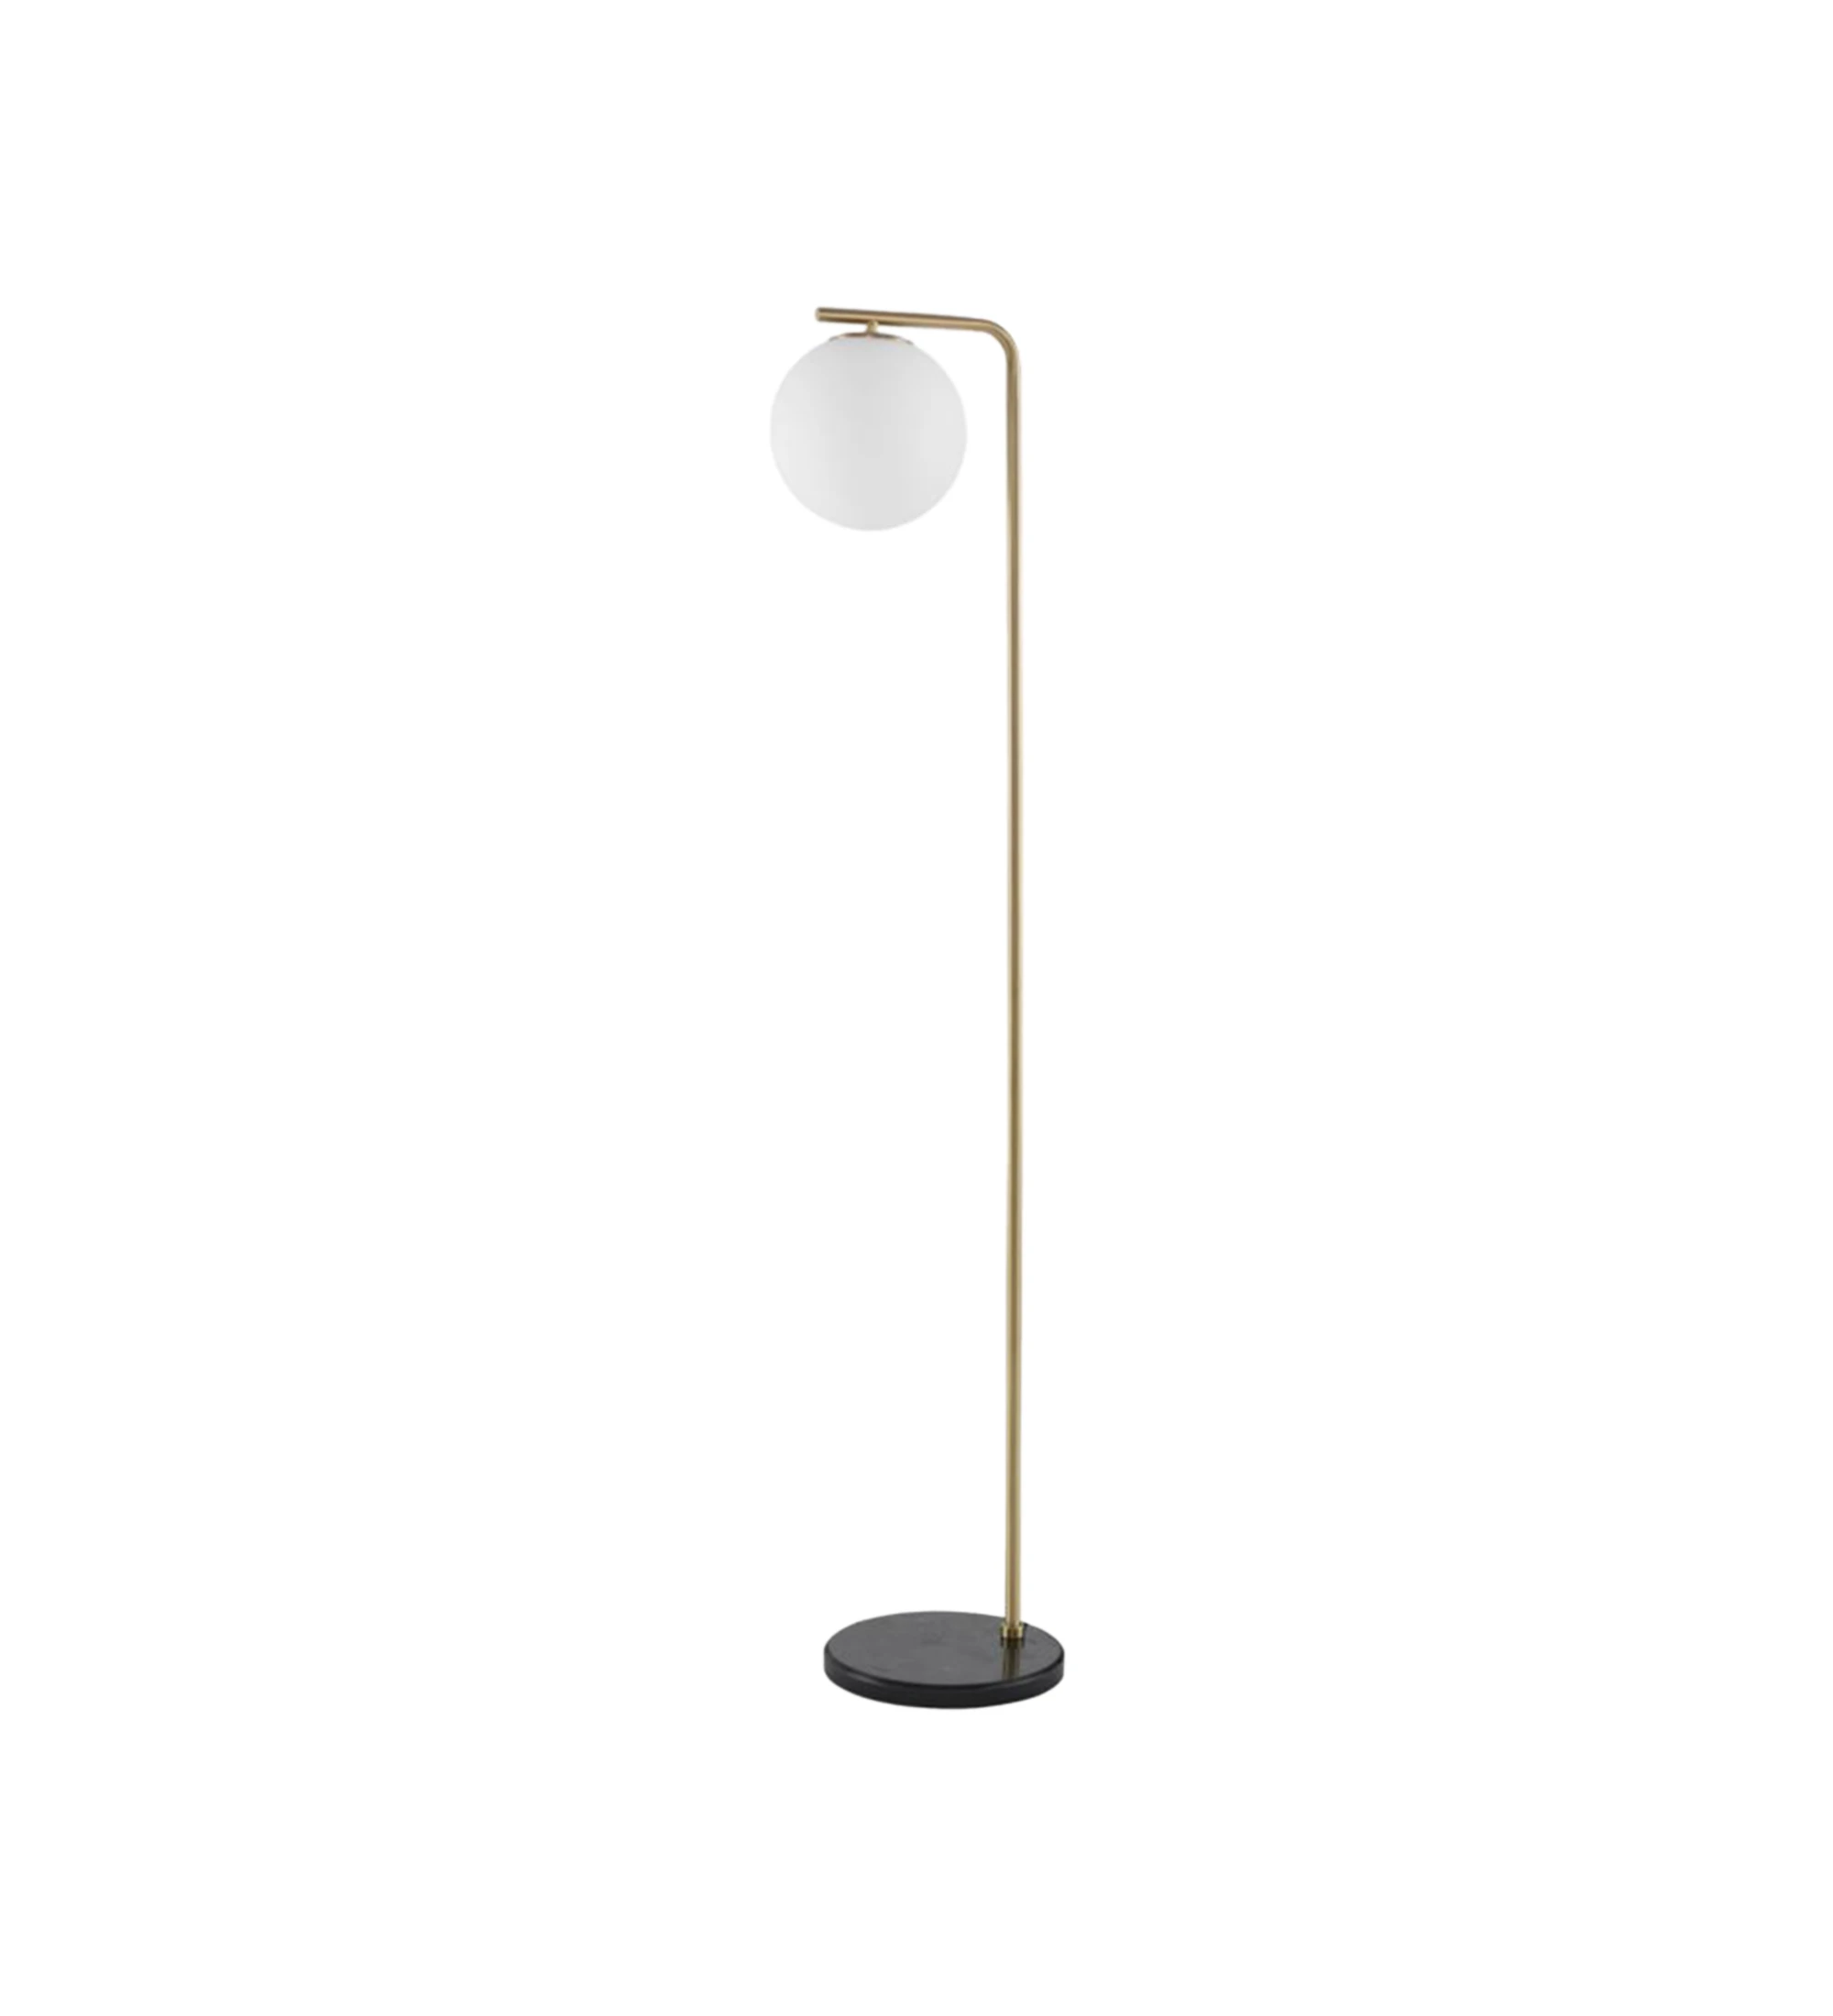  Floor lamp with black marble base, golden metal structure and opal glass diffuser.